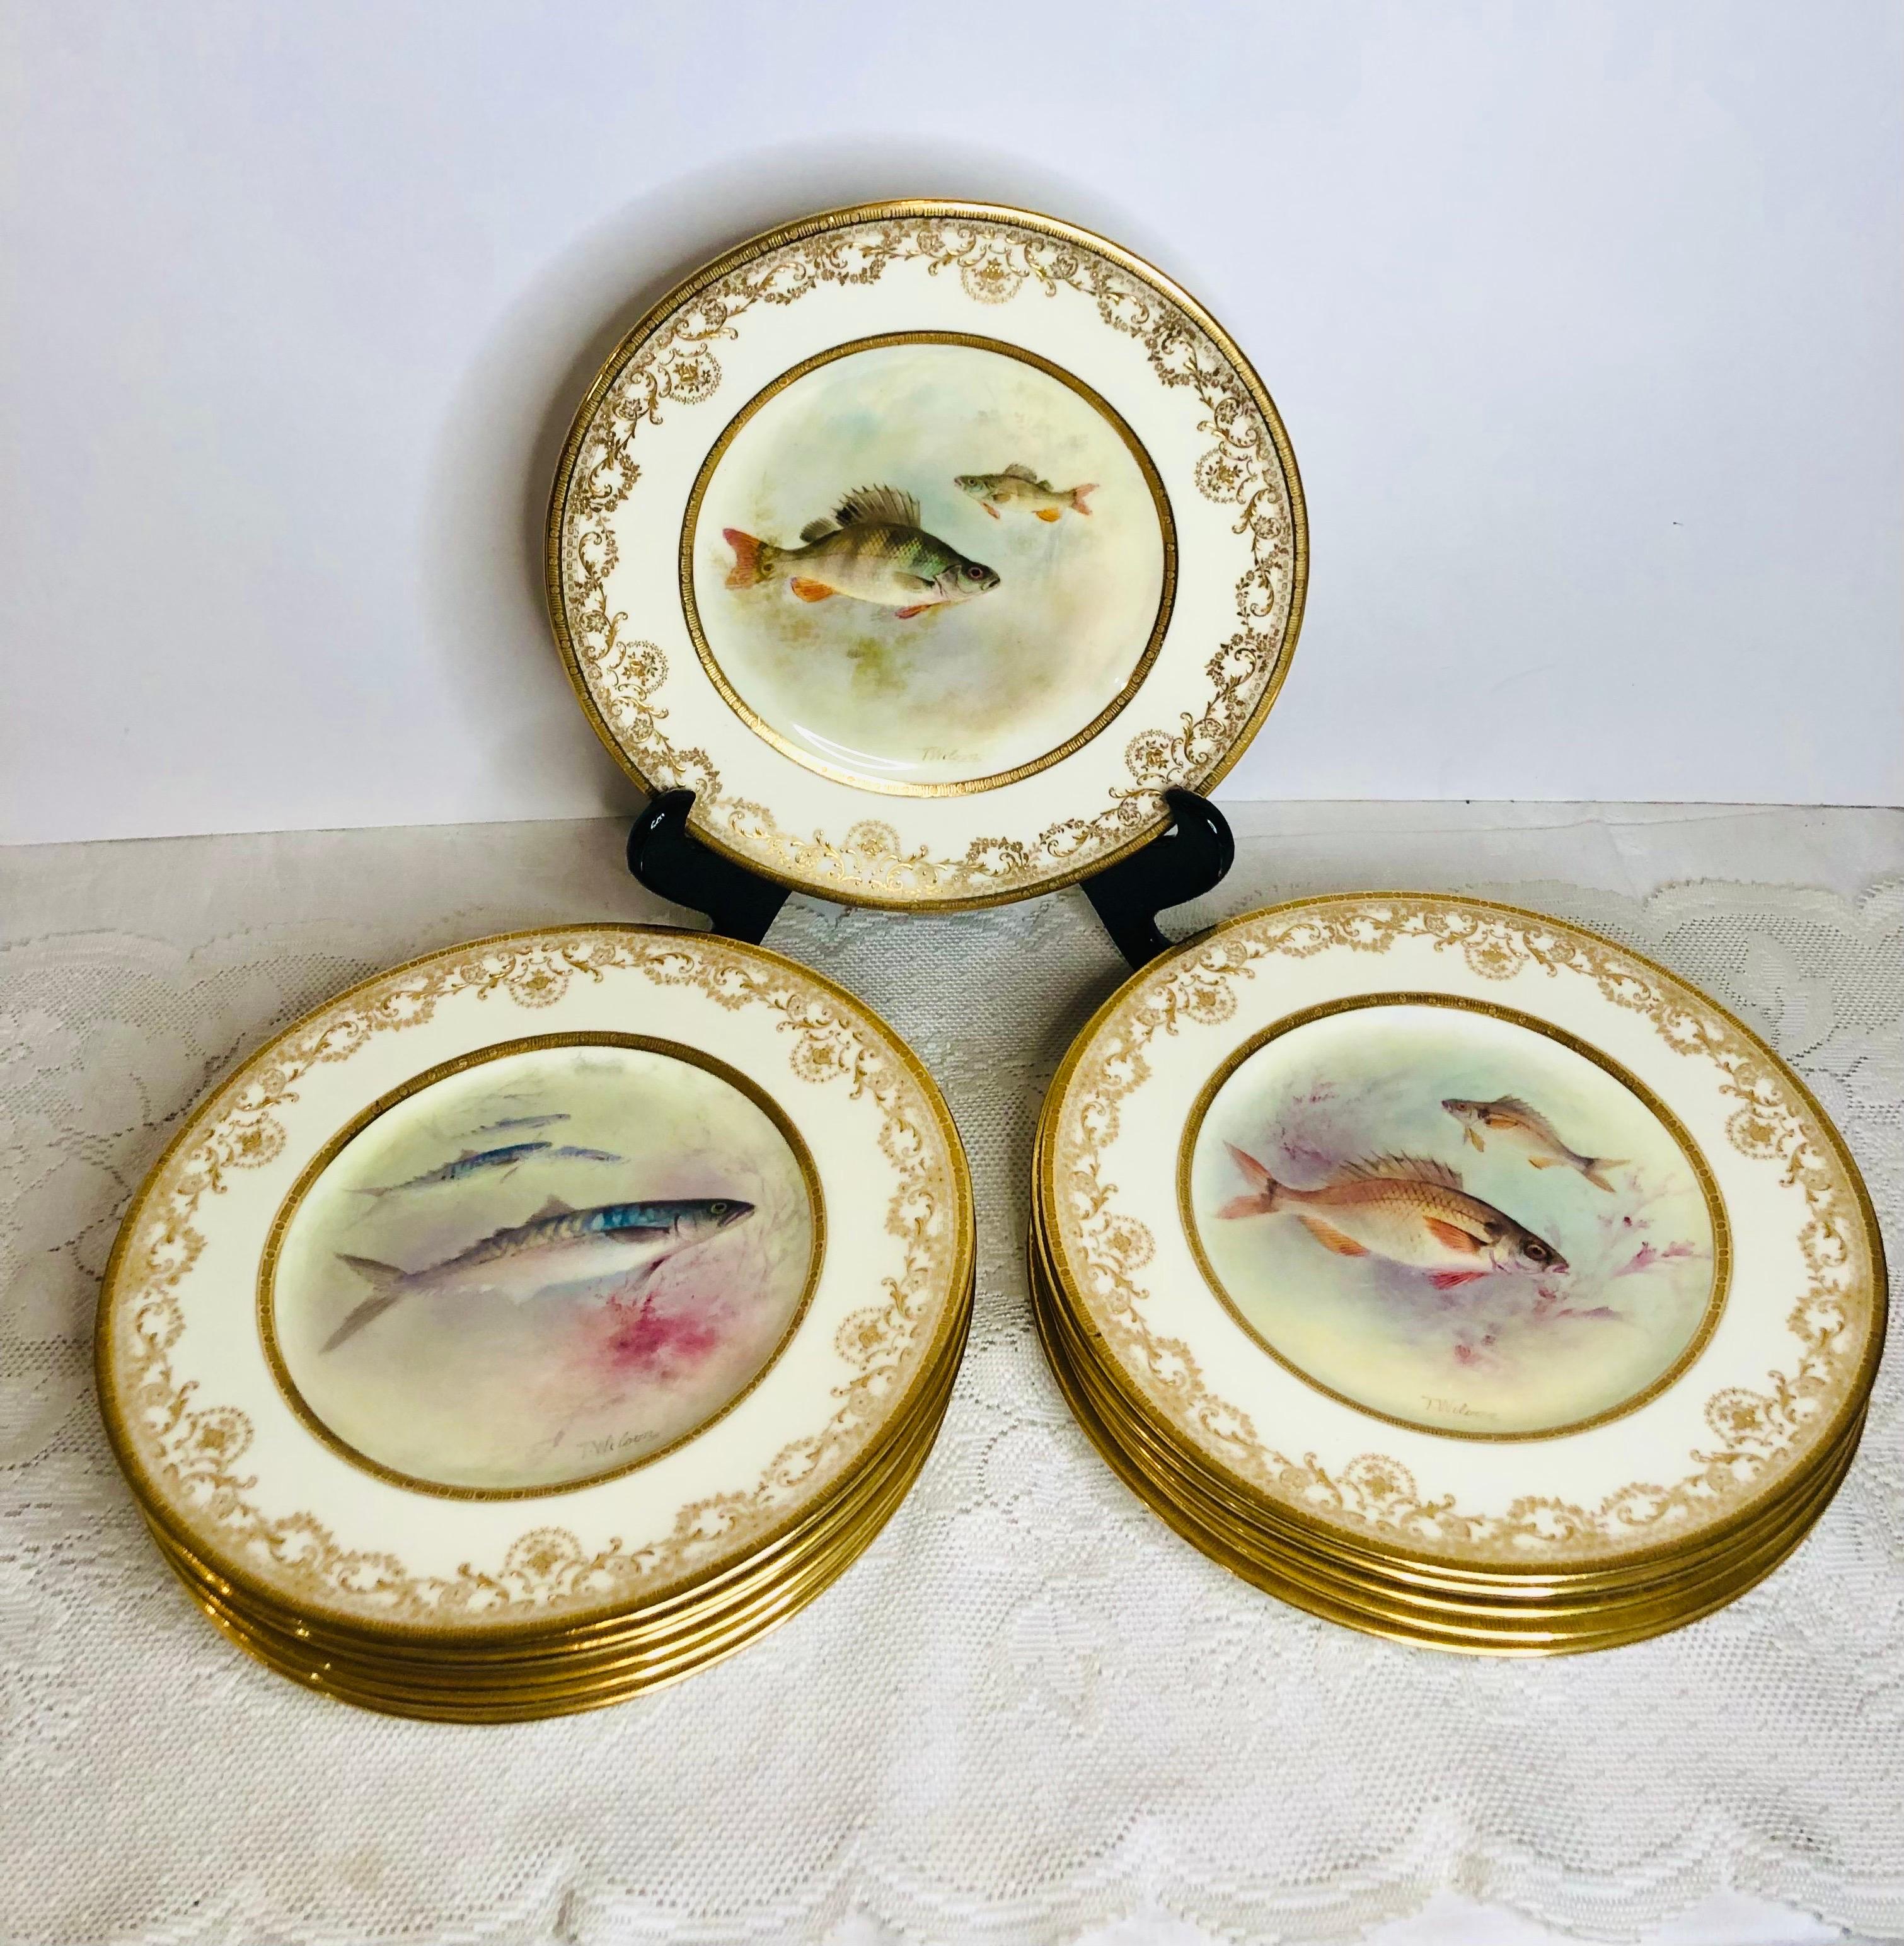 This is a magnificent set of twelve hand painted Royal Doulton fish plates artist signed T. Wilson. Each plate is painted beautifully with a different fish swimming in its natural habitat. The name of the type of fish painted on the front of the